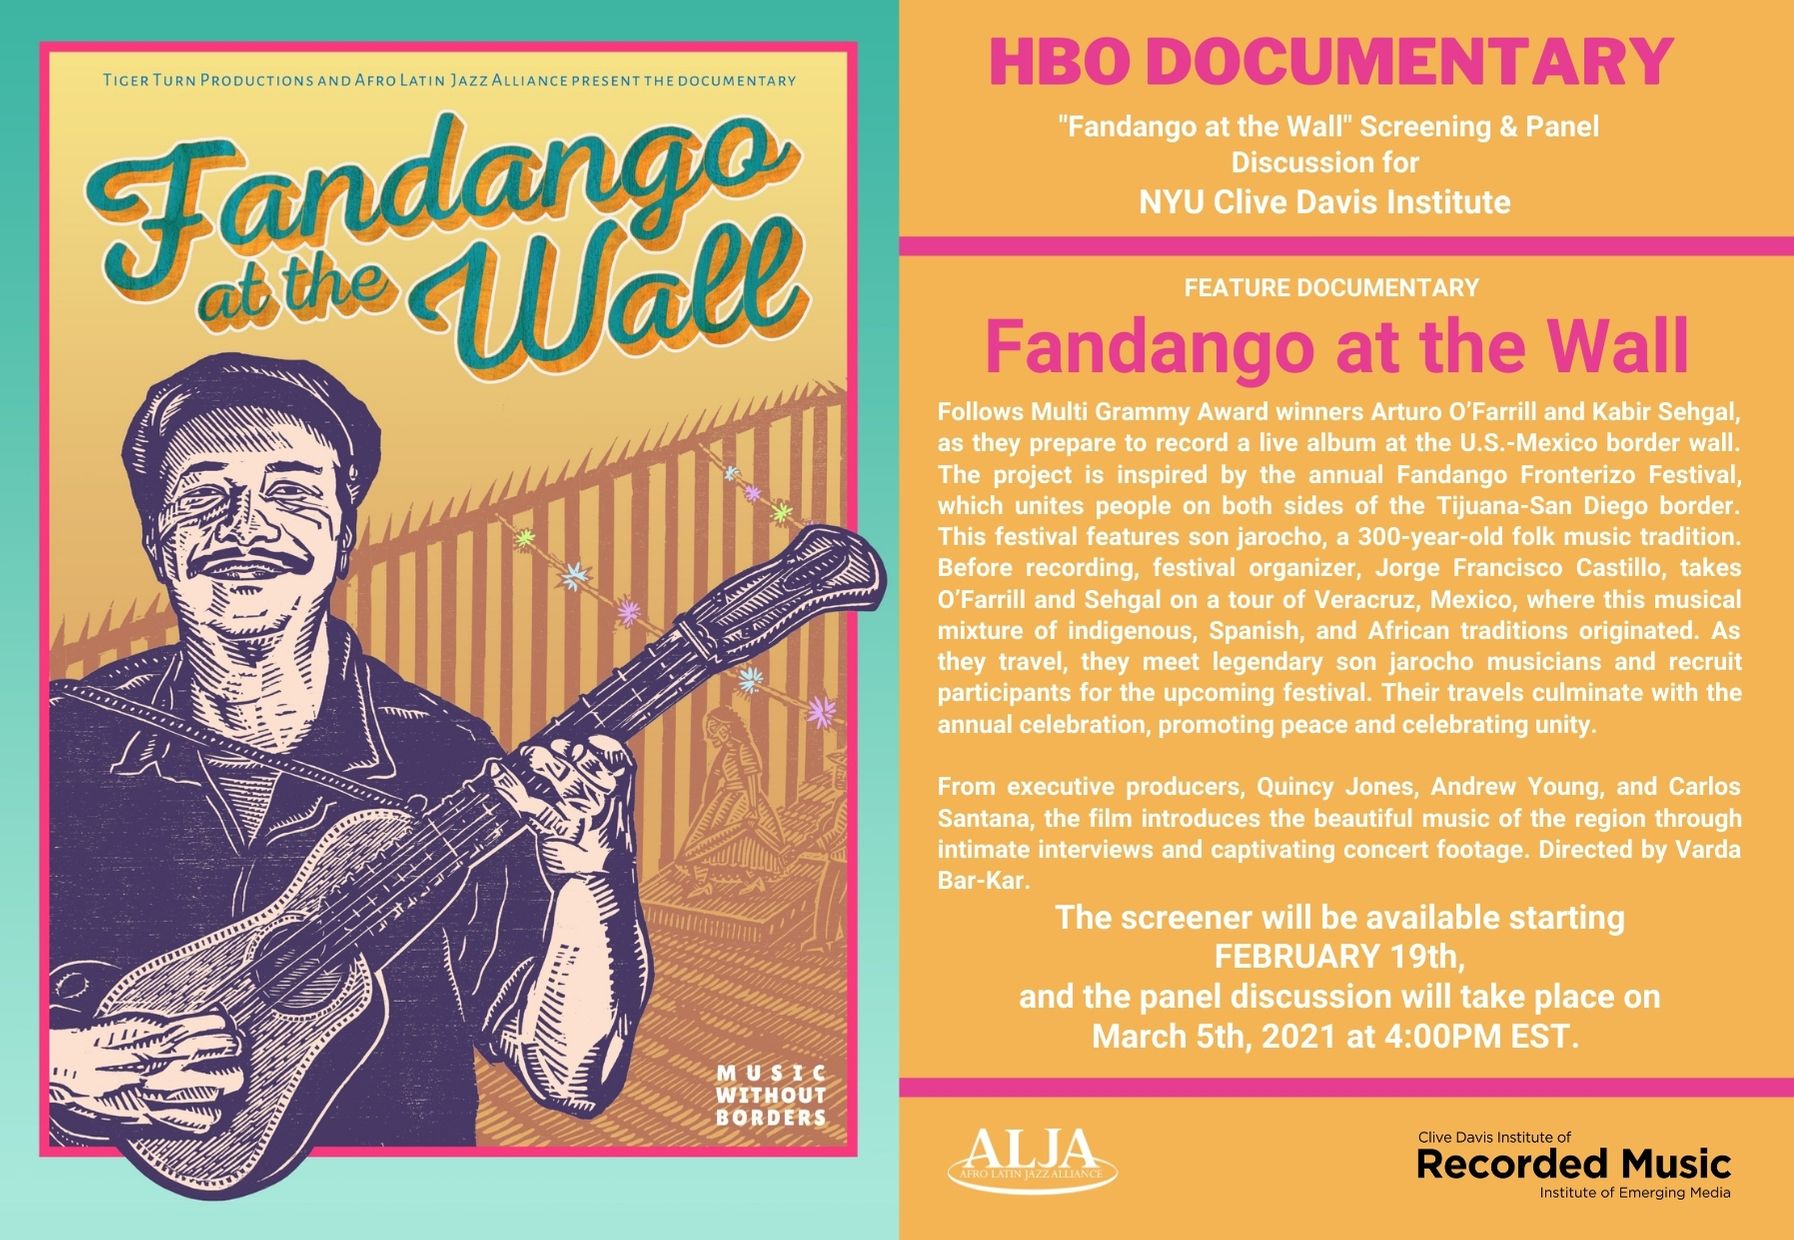 FANDANGO AT THE WALL Screening & Panel Discussion for Clive Davis Institute